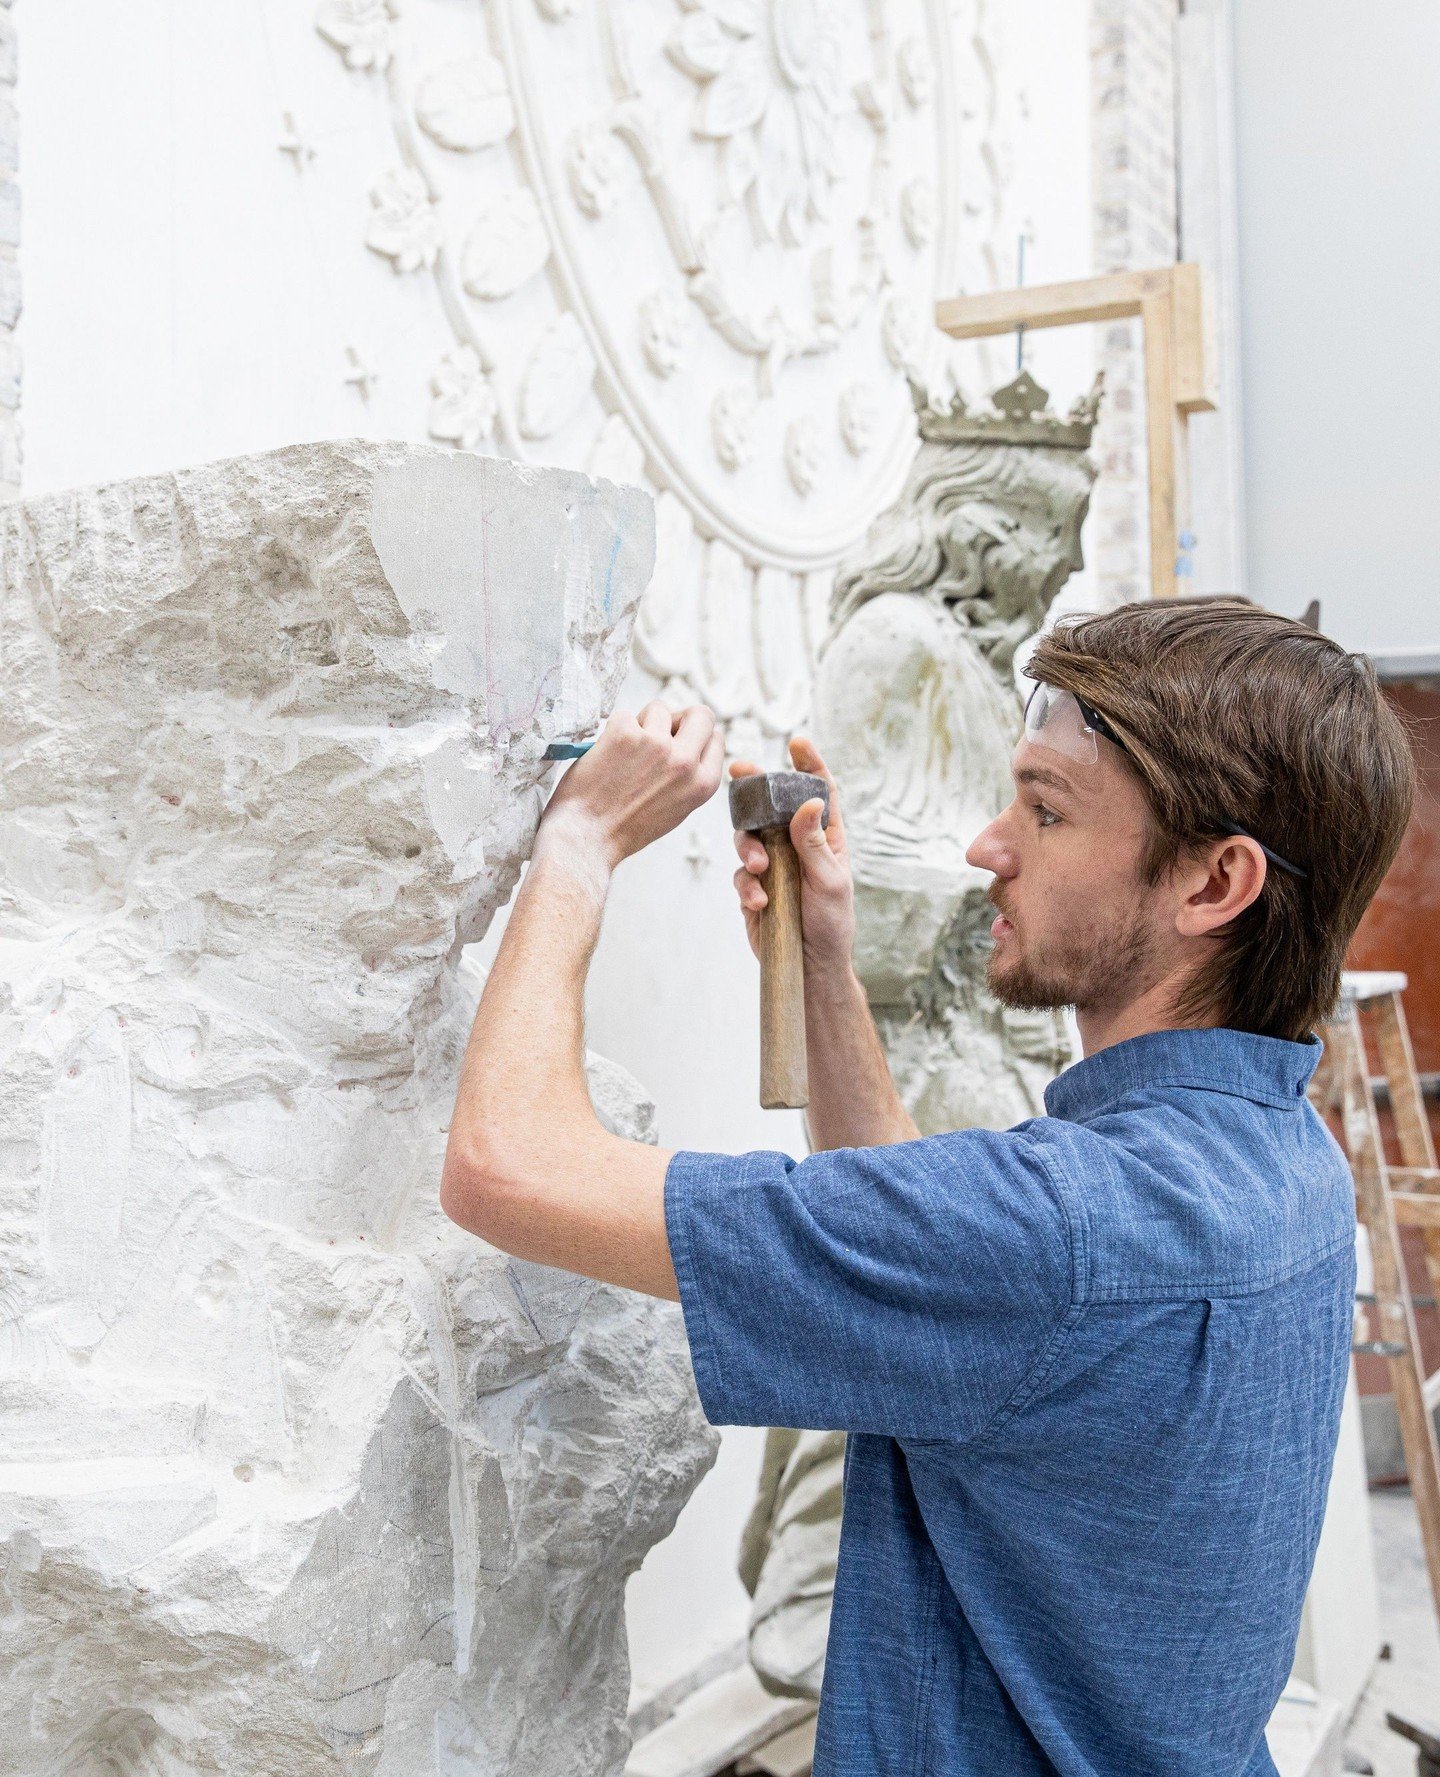 Final projects are well underway this spring. In the stone carving shop, Harrison Ogburn, junior stone carver, meticulously refines his replication of a full-scale carving of Queen Eleanor using the centuries-old pointing technique. Harrison will con